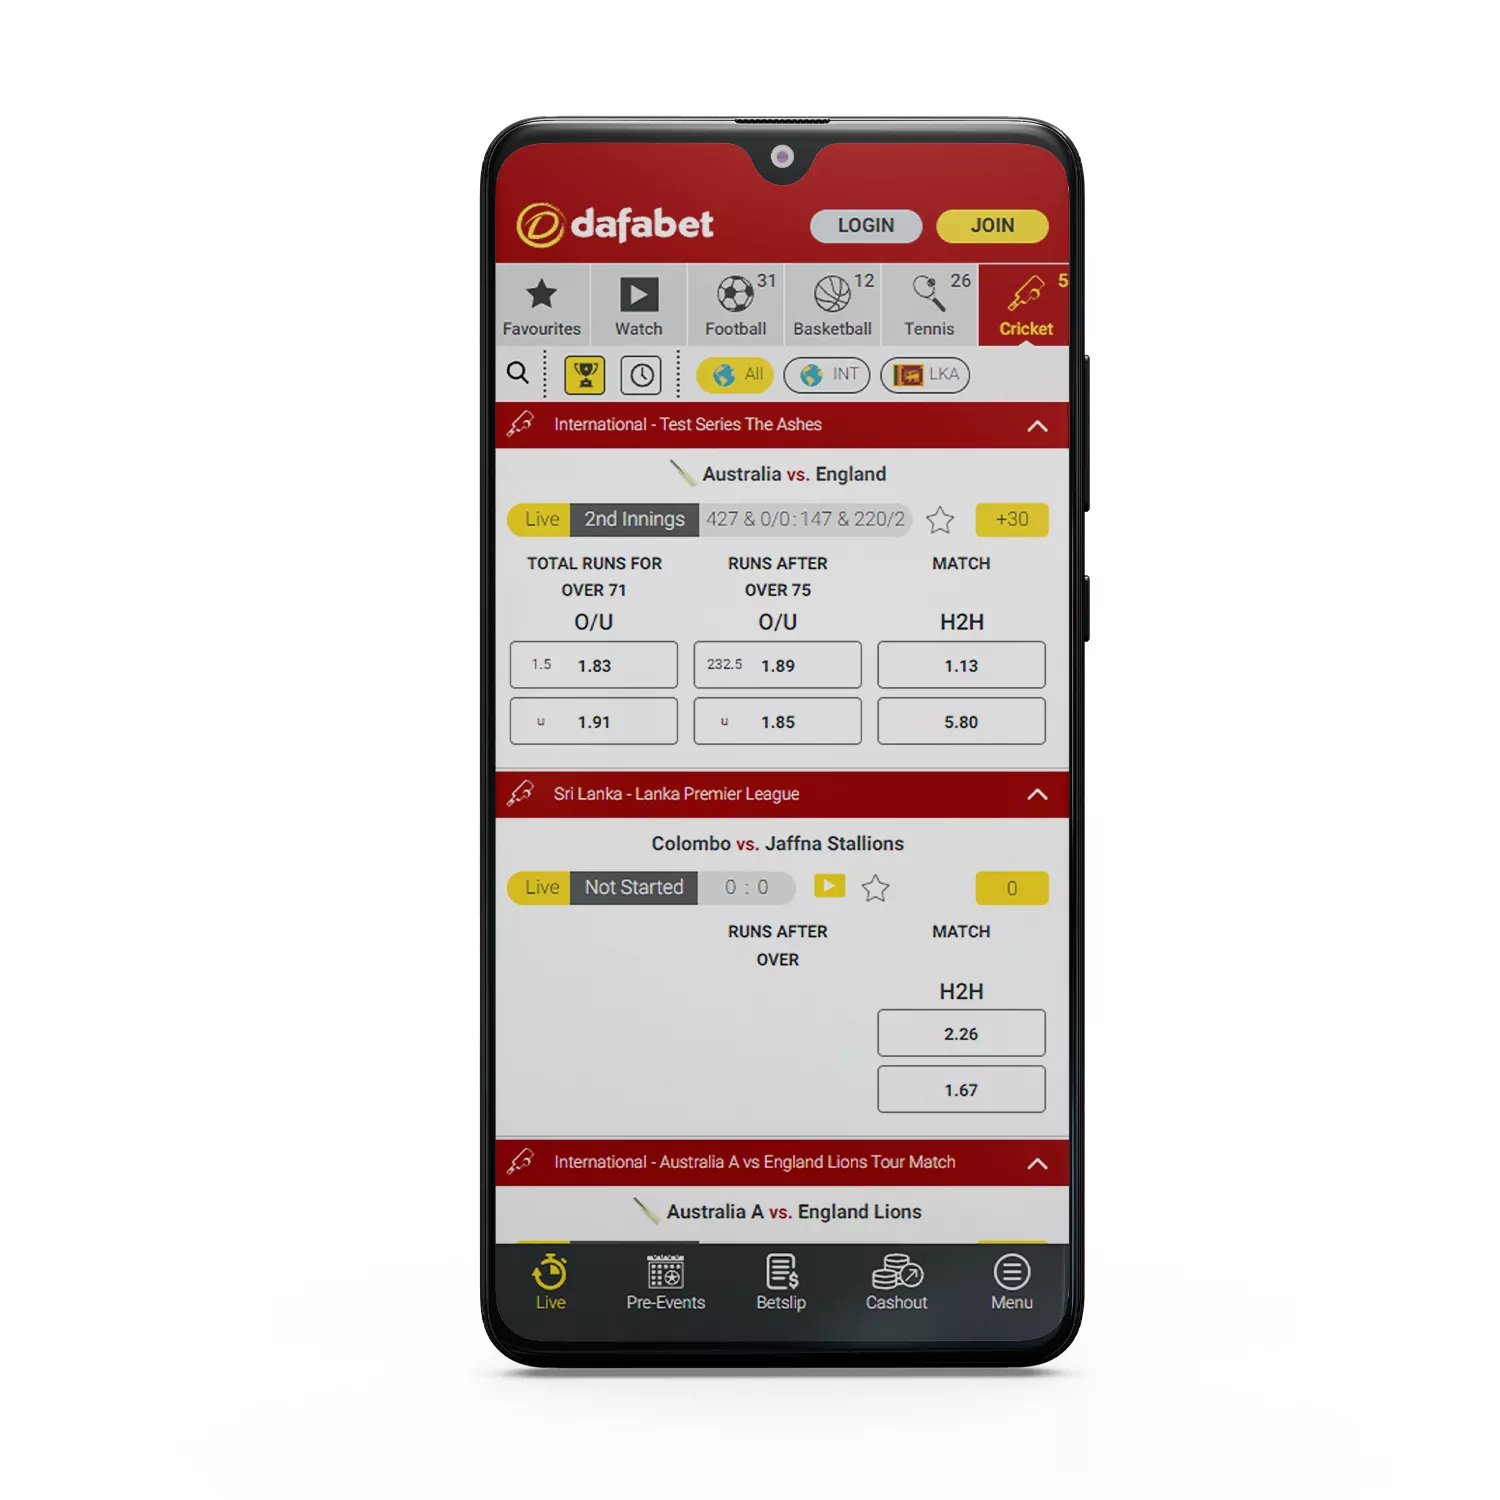 To place bets online from anywhere, download the Dafabet app for your device.